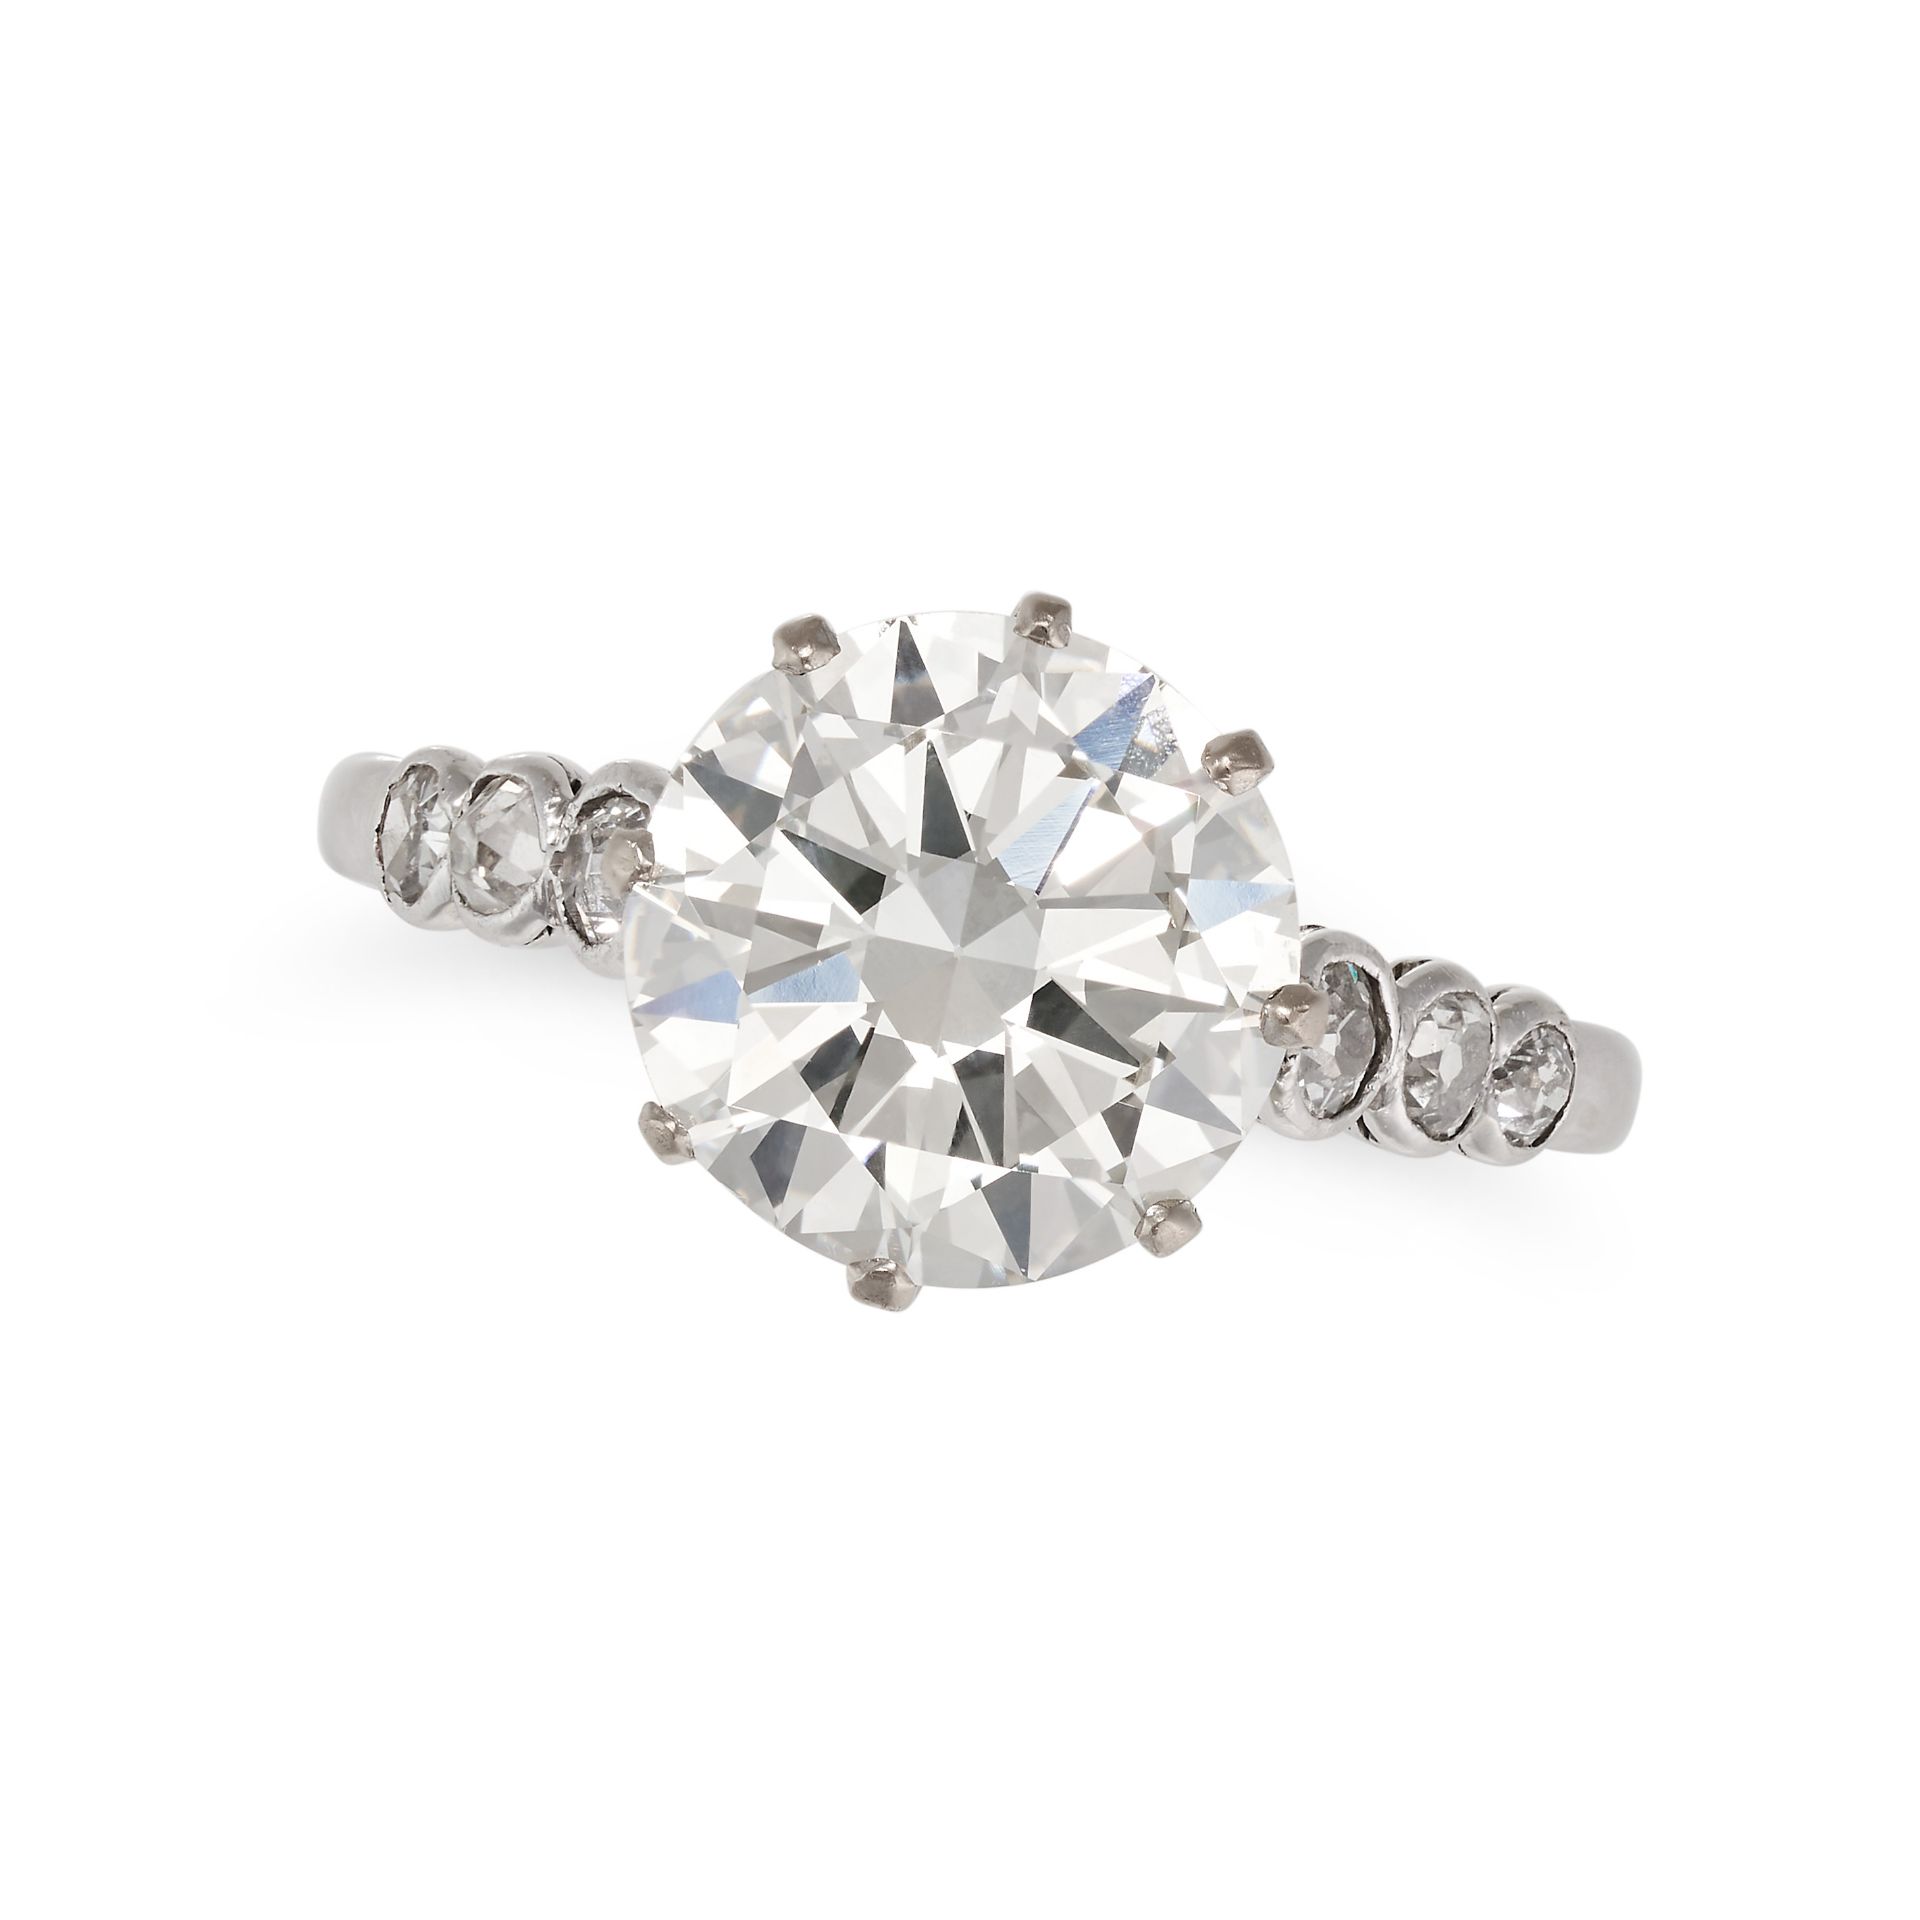 A 3.77 CARAT SOLITAIRE DIAMOND RING set with a round brilliant cut diamond of 3.77 carats, the sh...